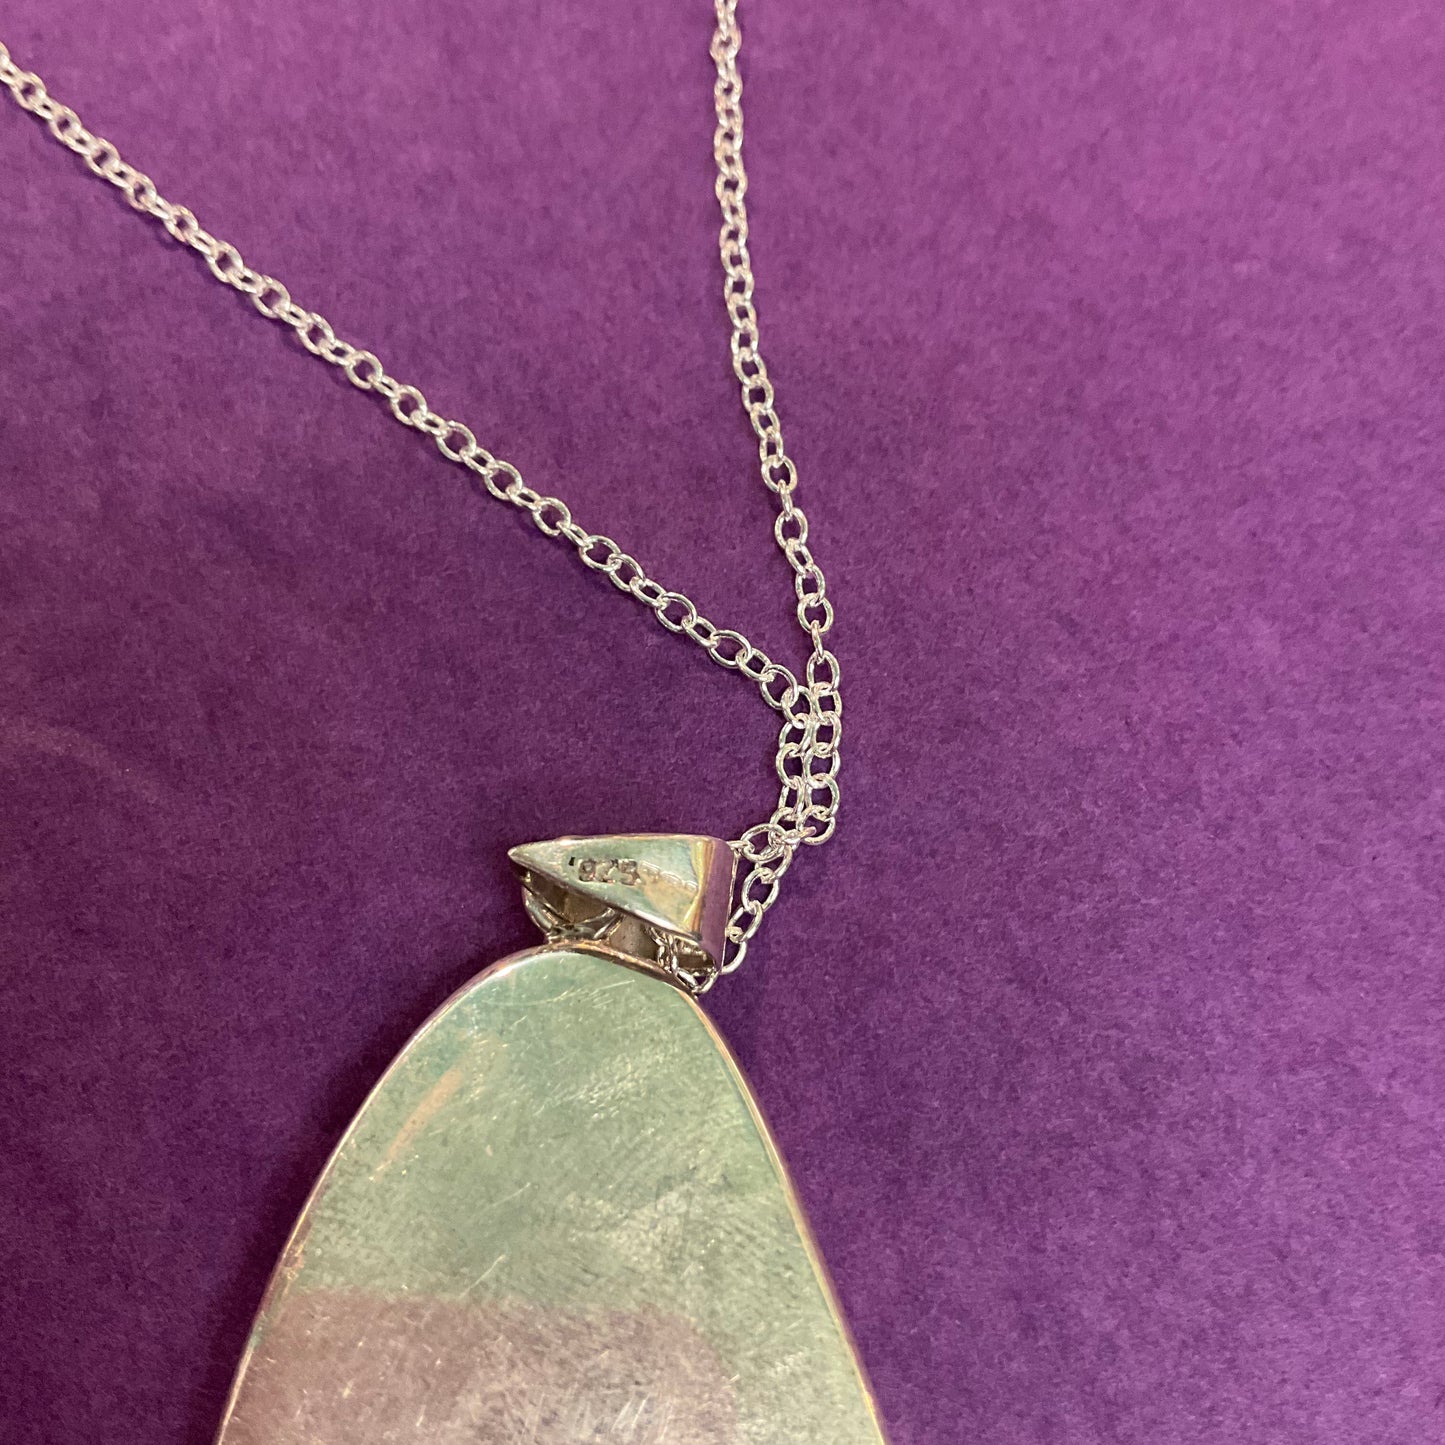 Vintage Mother of Pearl and 925 Silver Pendant